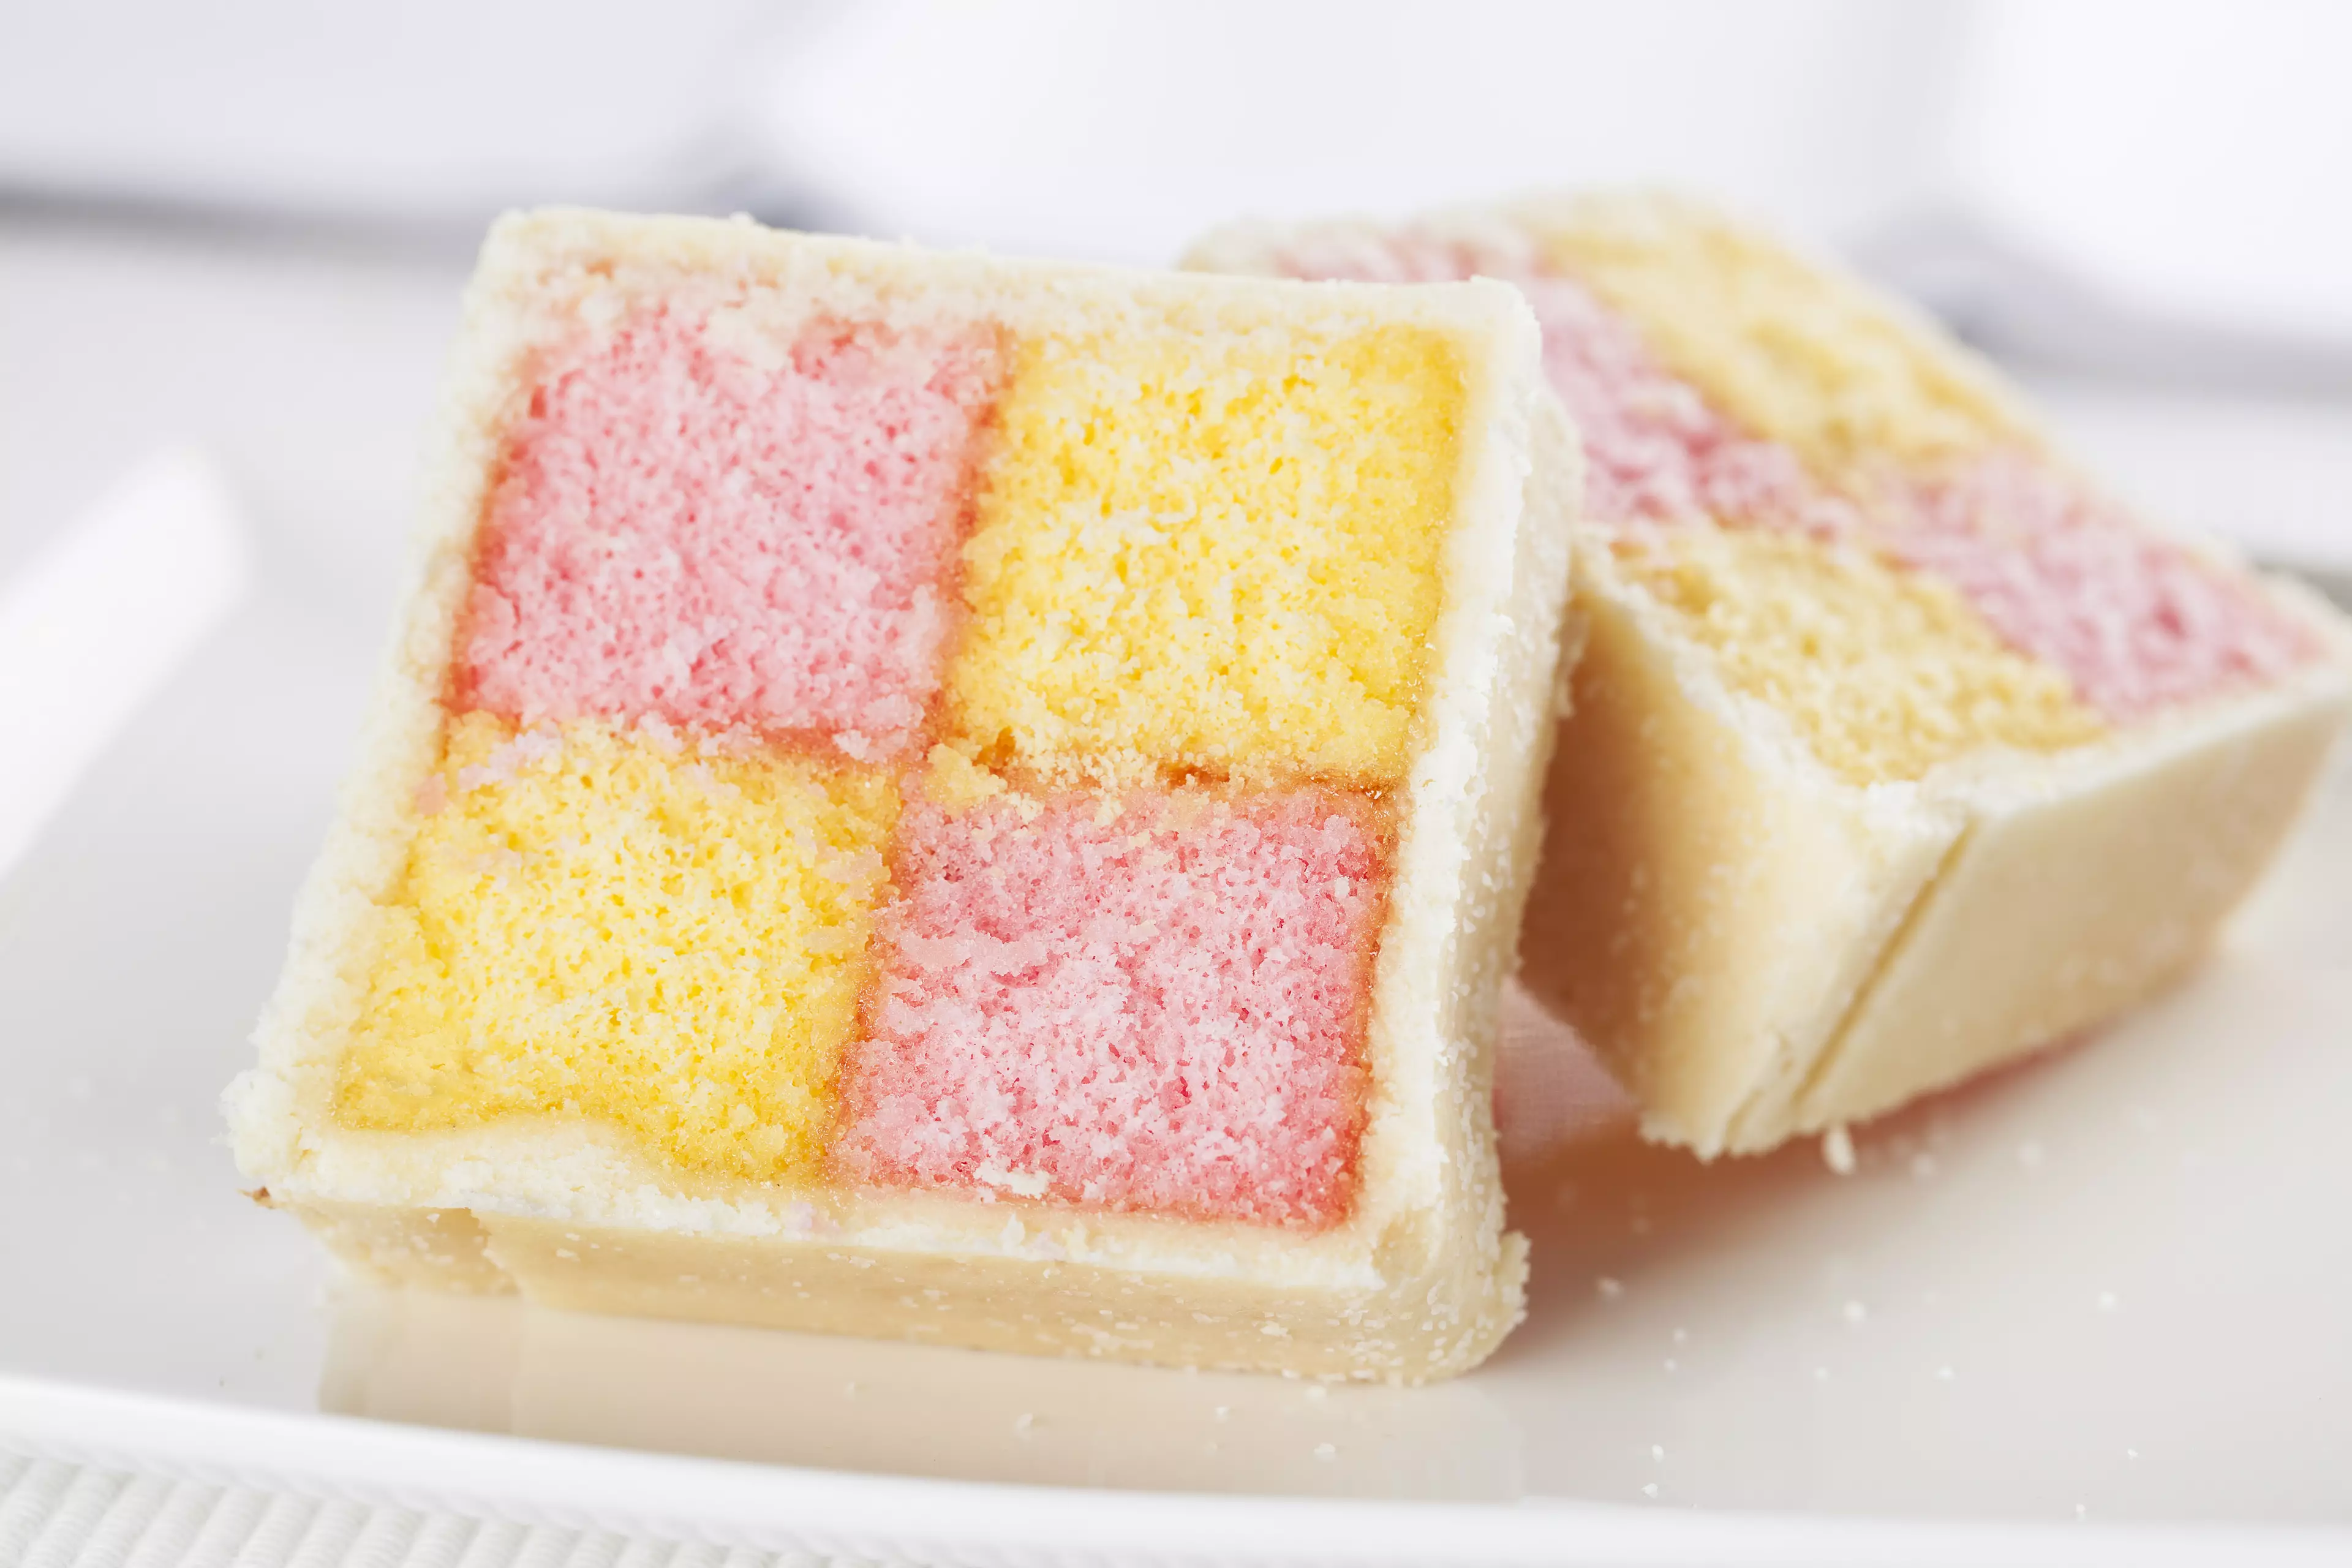 The Biscoff Battenberg is a take on the marzipan coated classic (